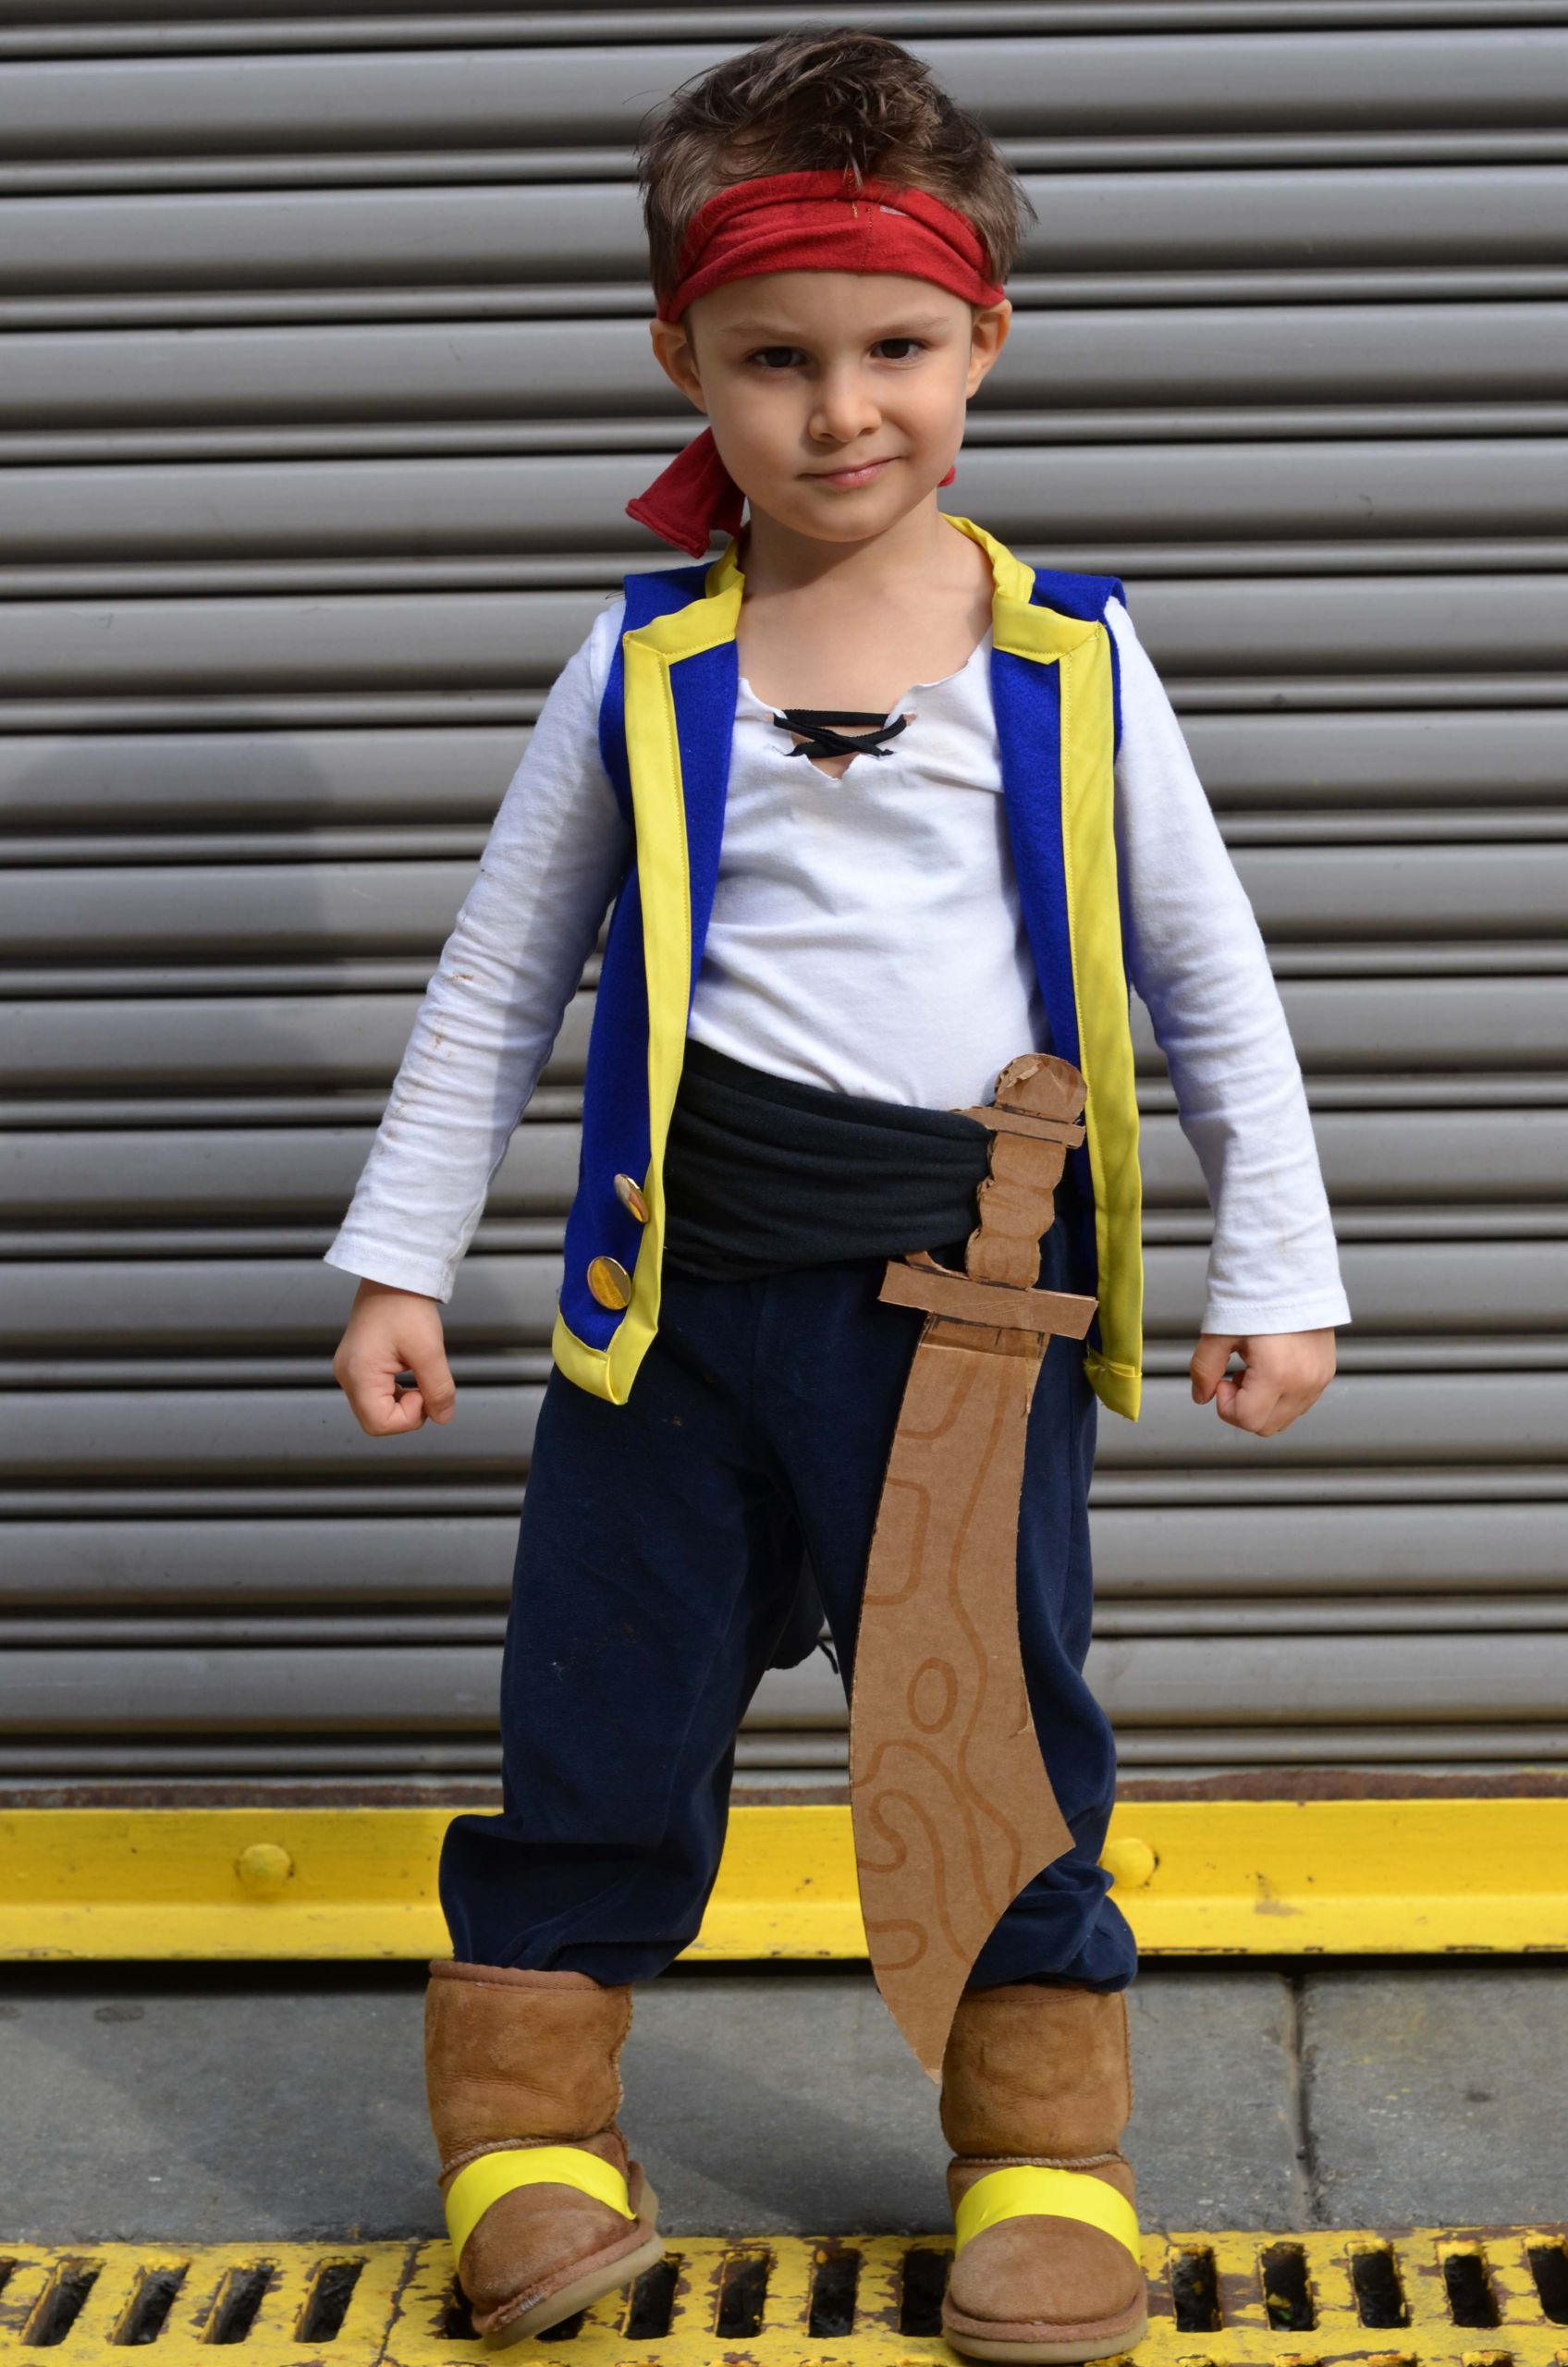 DIY Boy Costumes
 DIY Jake and The Never Land Pirates Costume